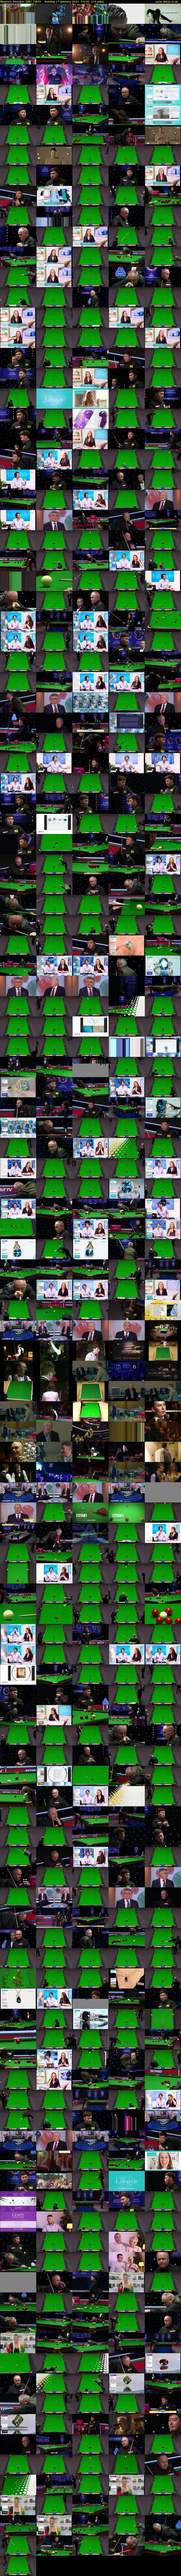 Masters Snooker (BBC TWO) Sunday 17 January 2021 19:00 - 22:30